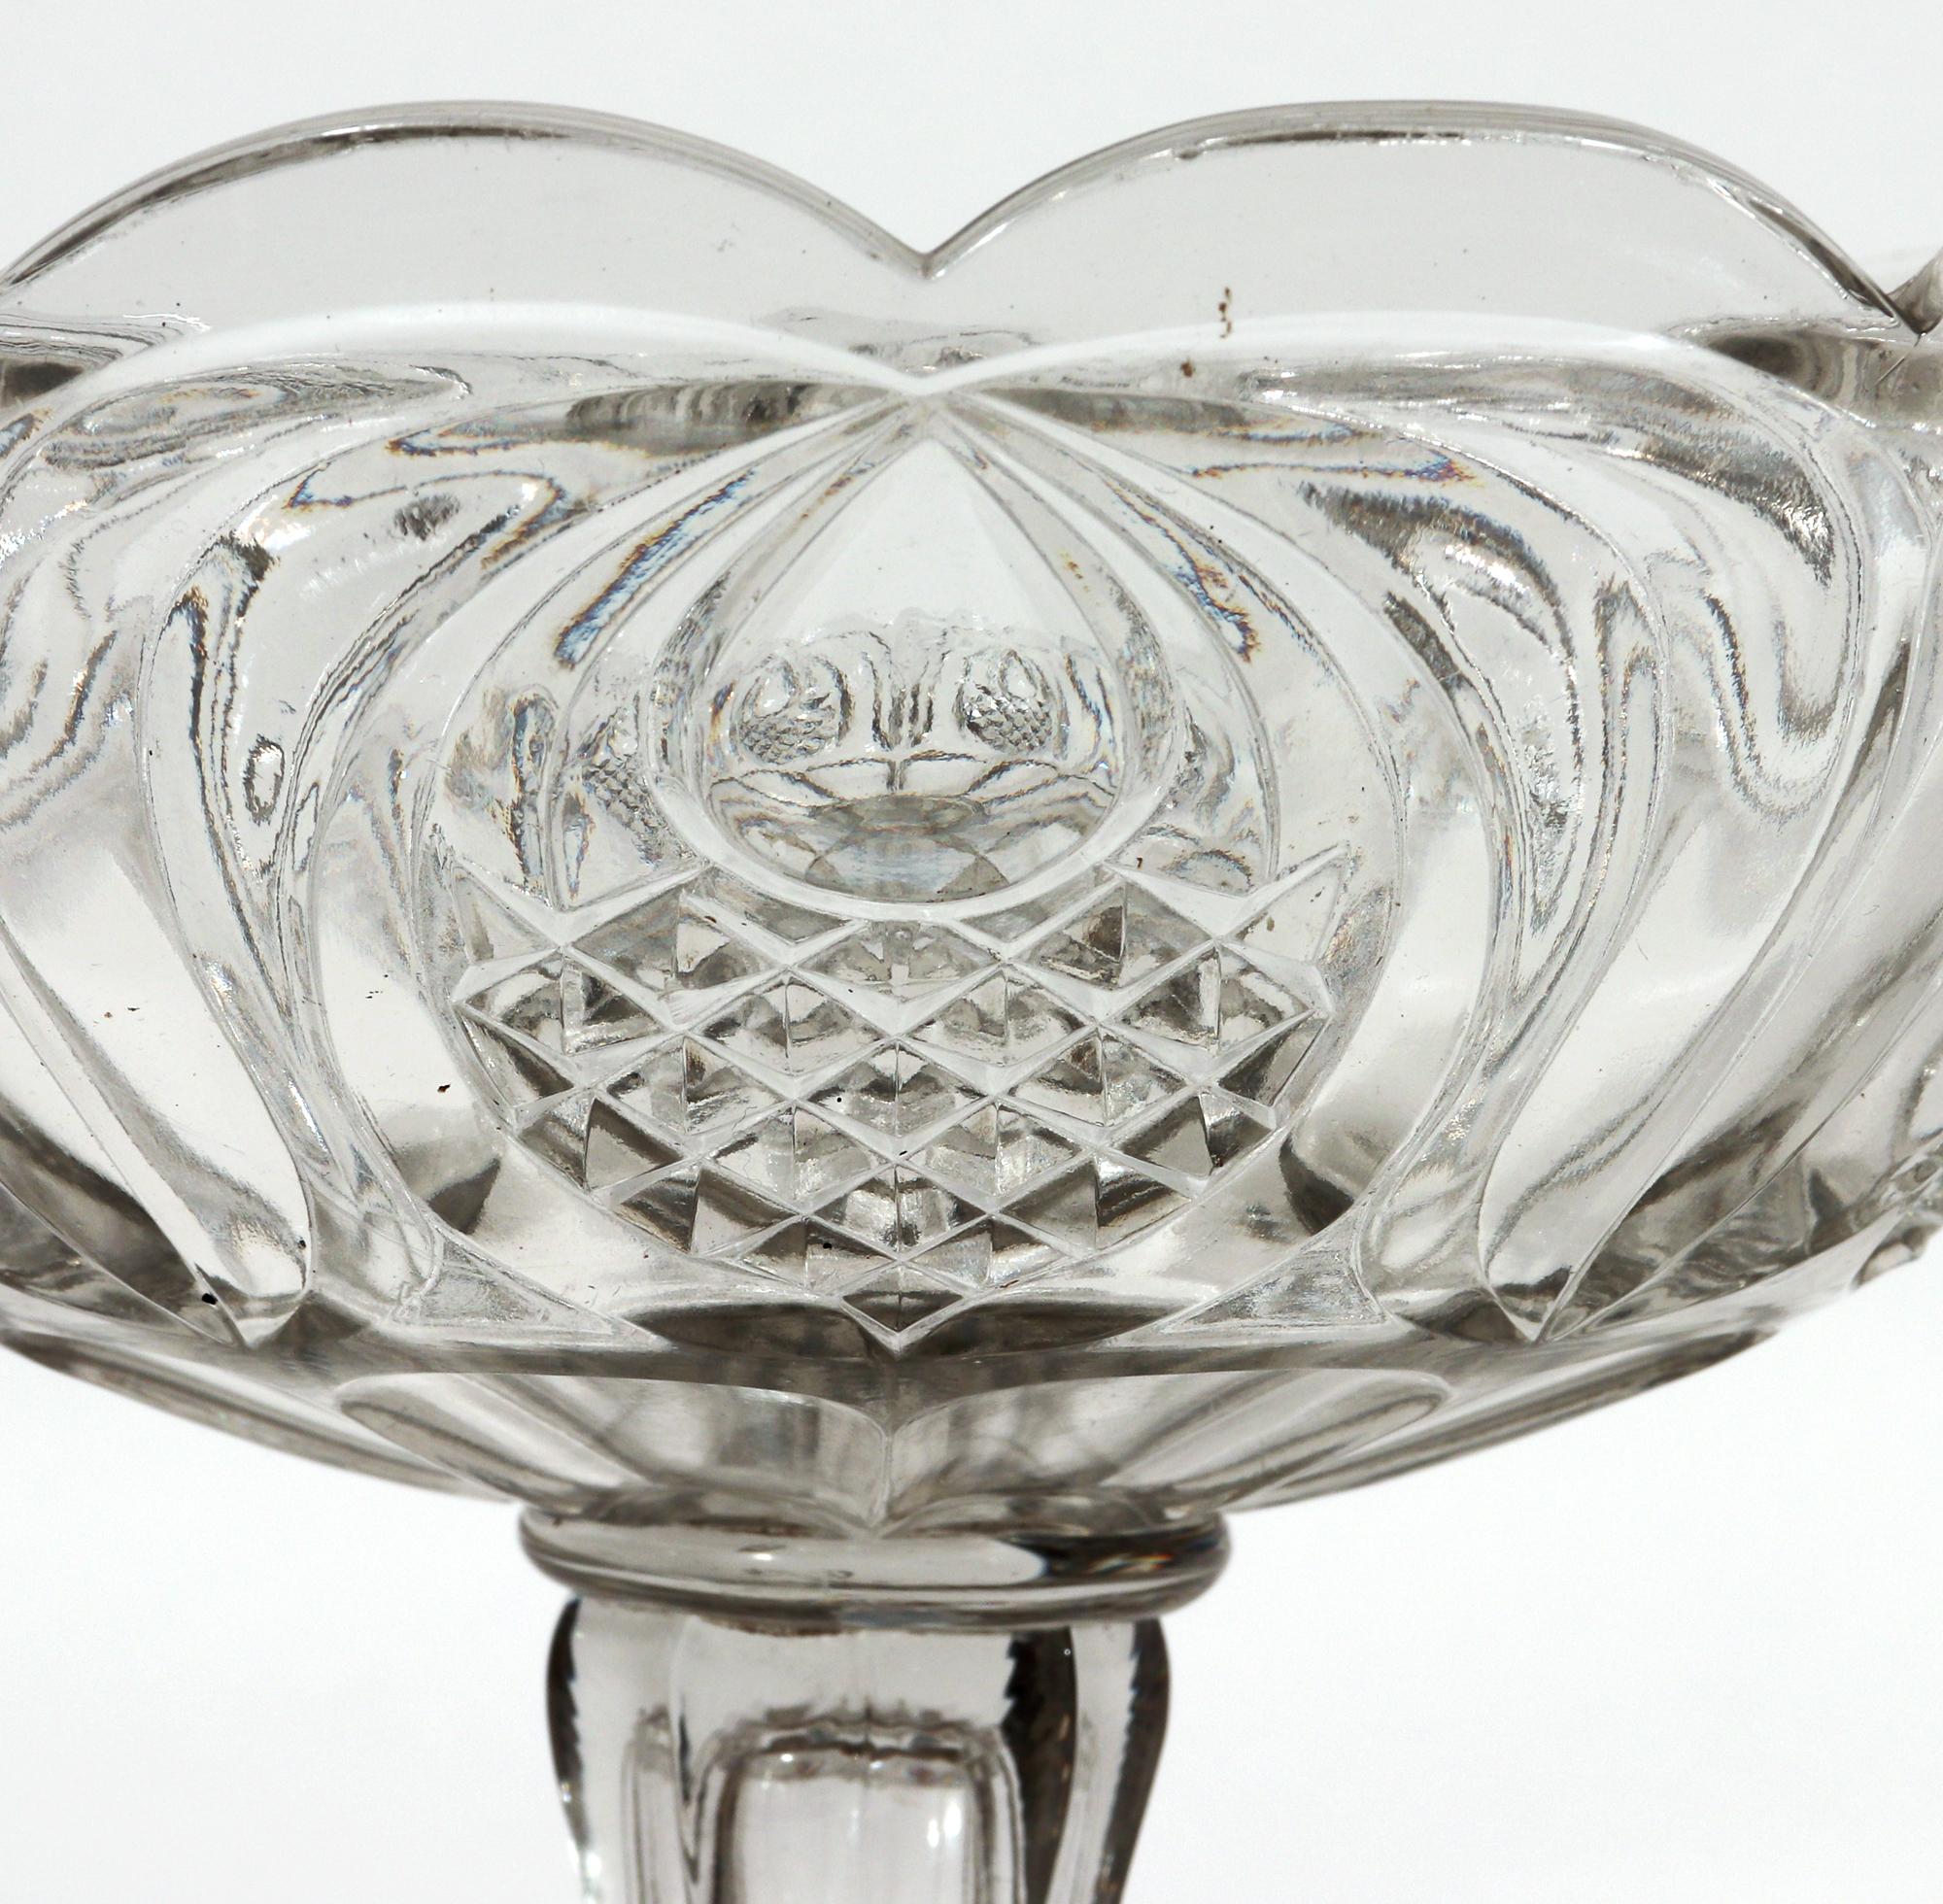 Boston & Sandwich American Pressed Glass Compote with Pineapple Pattern In Good Condition For Sale In Downingtown, PA